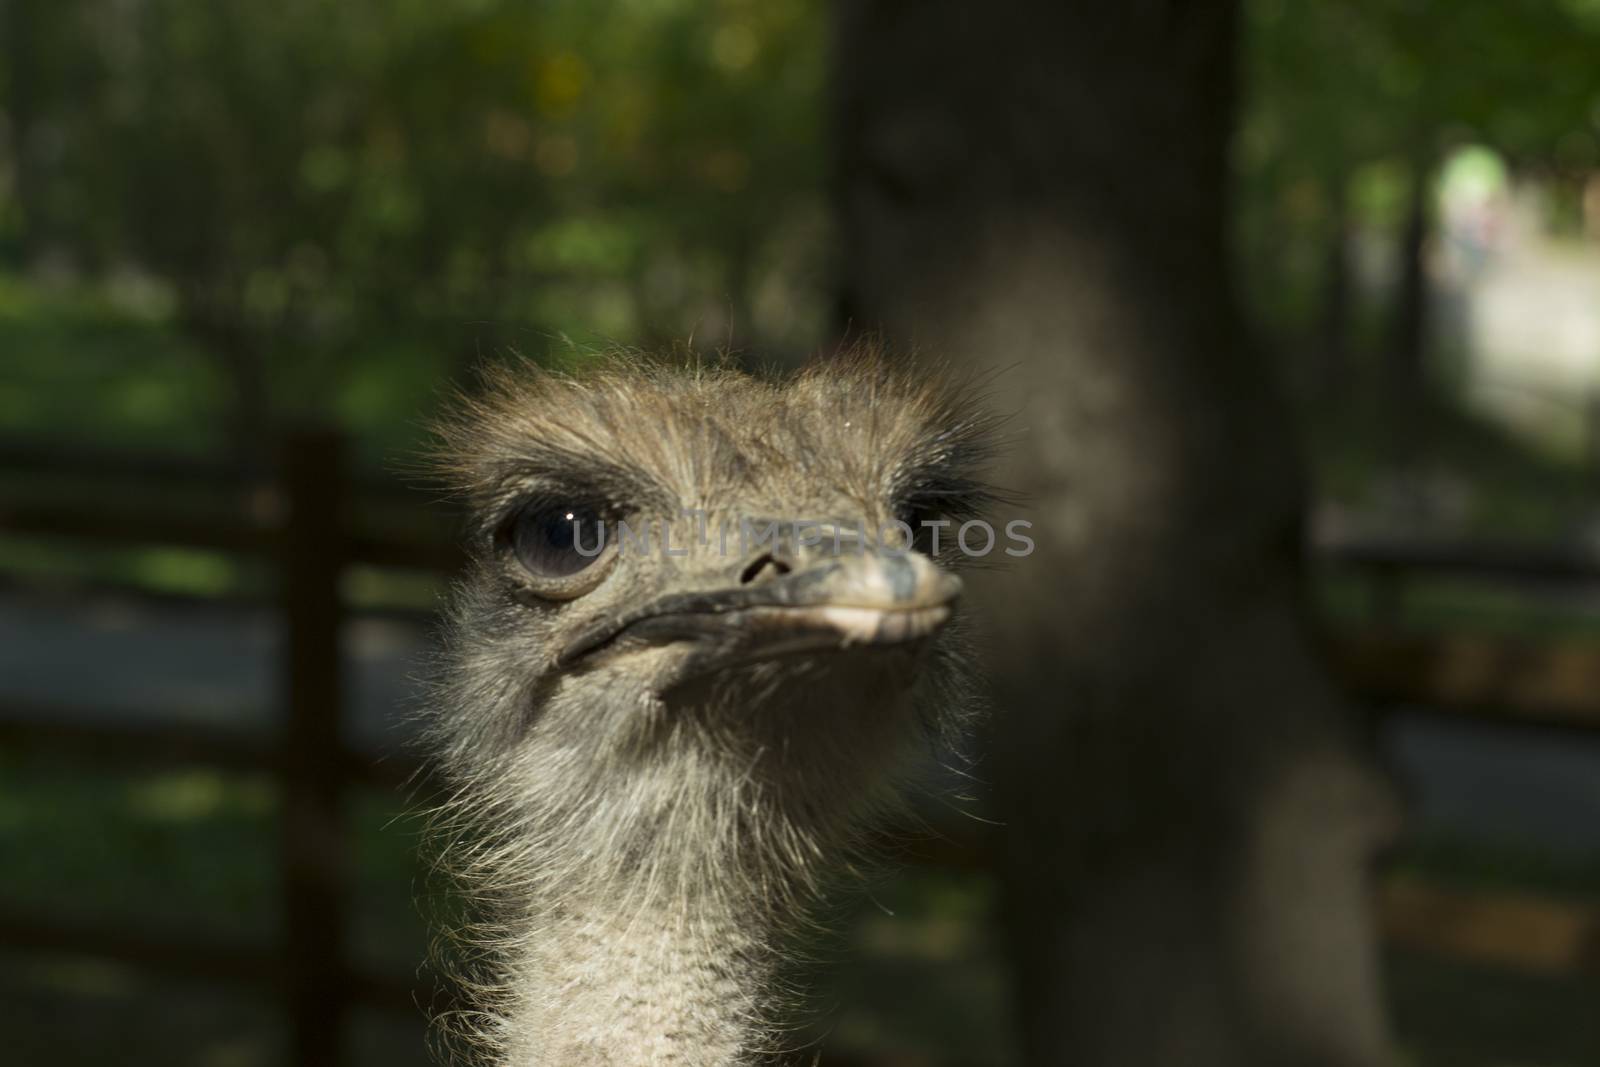 Several ostrich by Irene1601